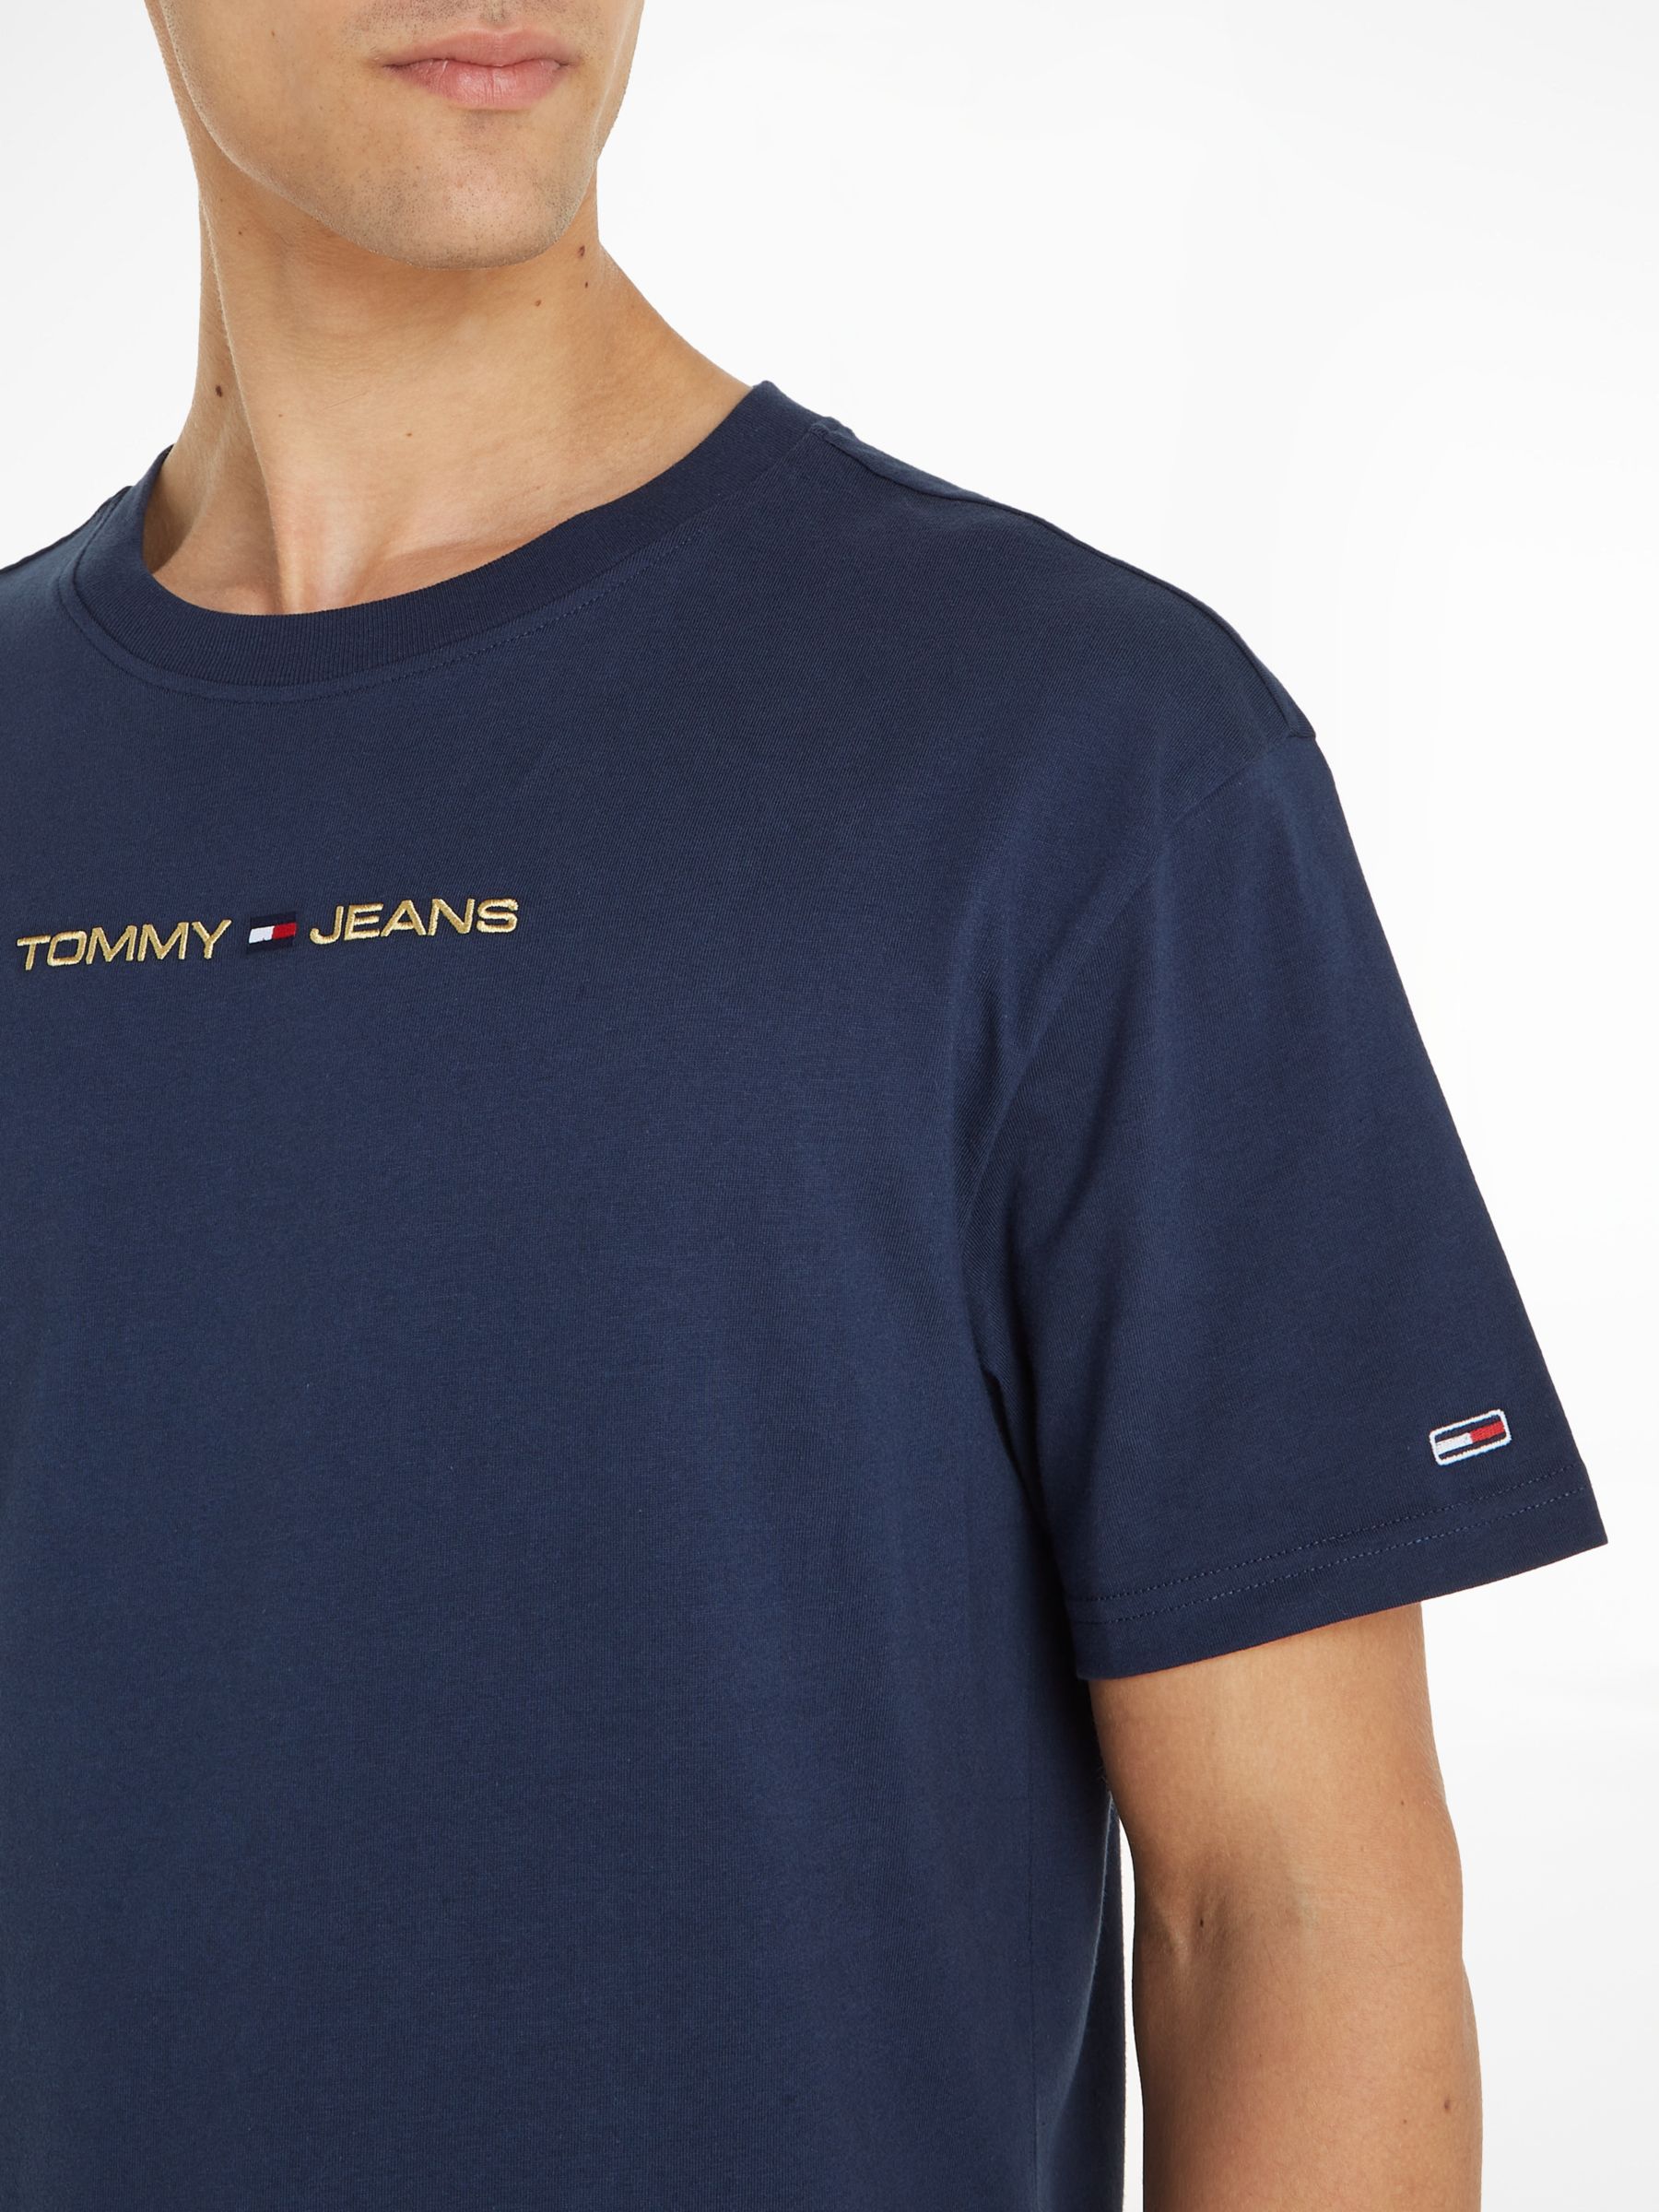 Tommy Hilfiger Logo Embroidered Cotton T-Shirt, Twilight Navy